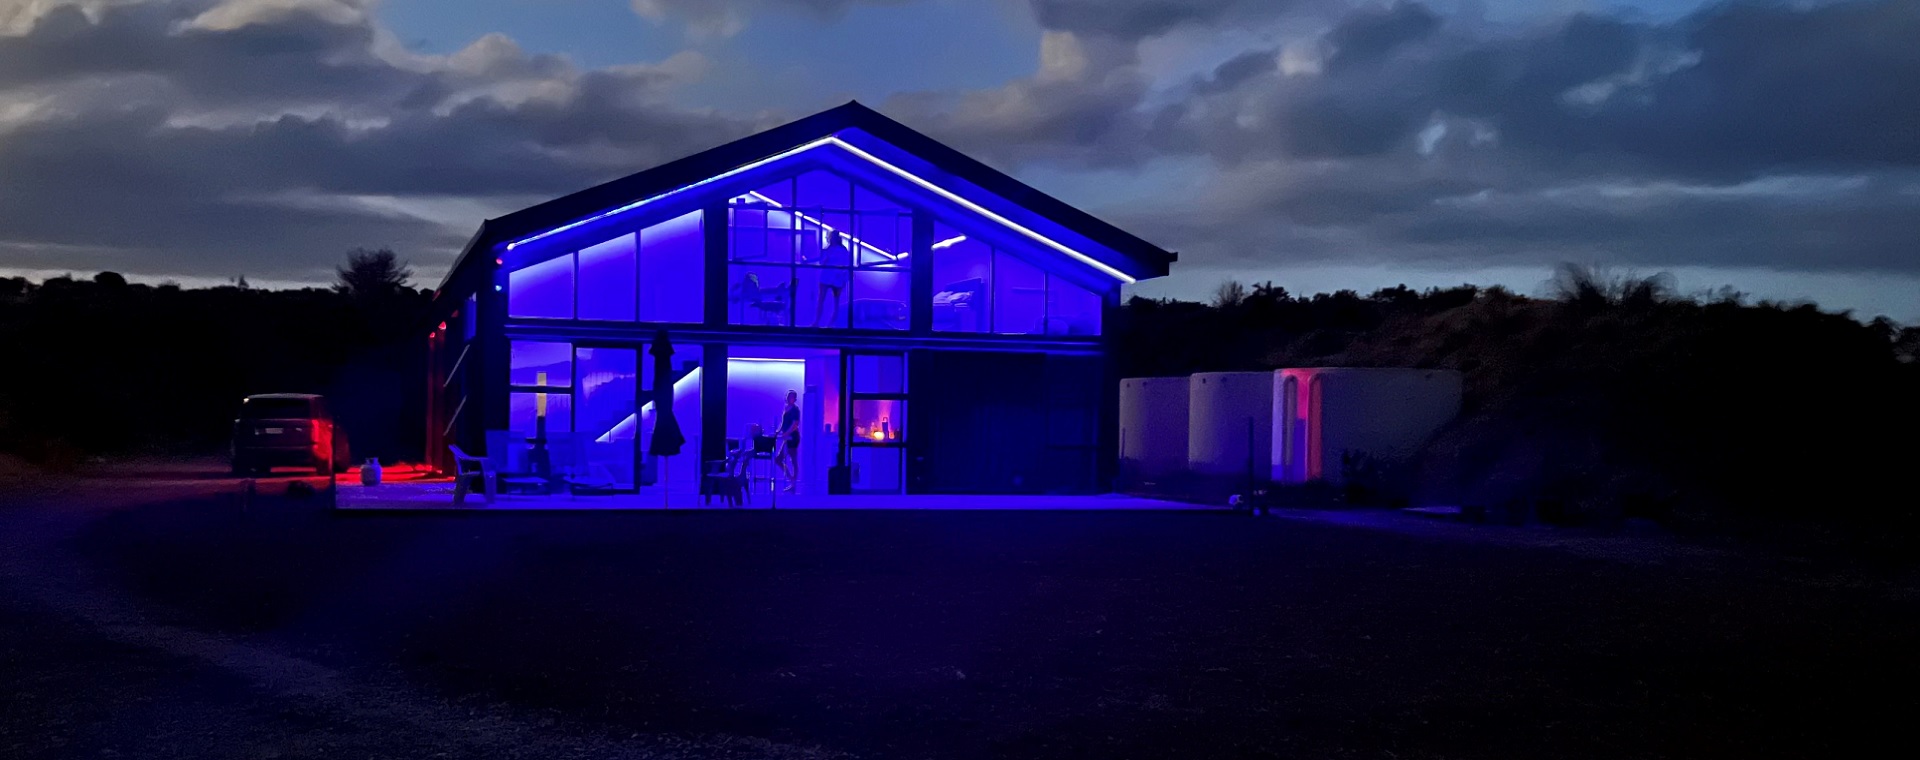 Off-grid, rural home at night showing blue LED lighting theme